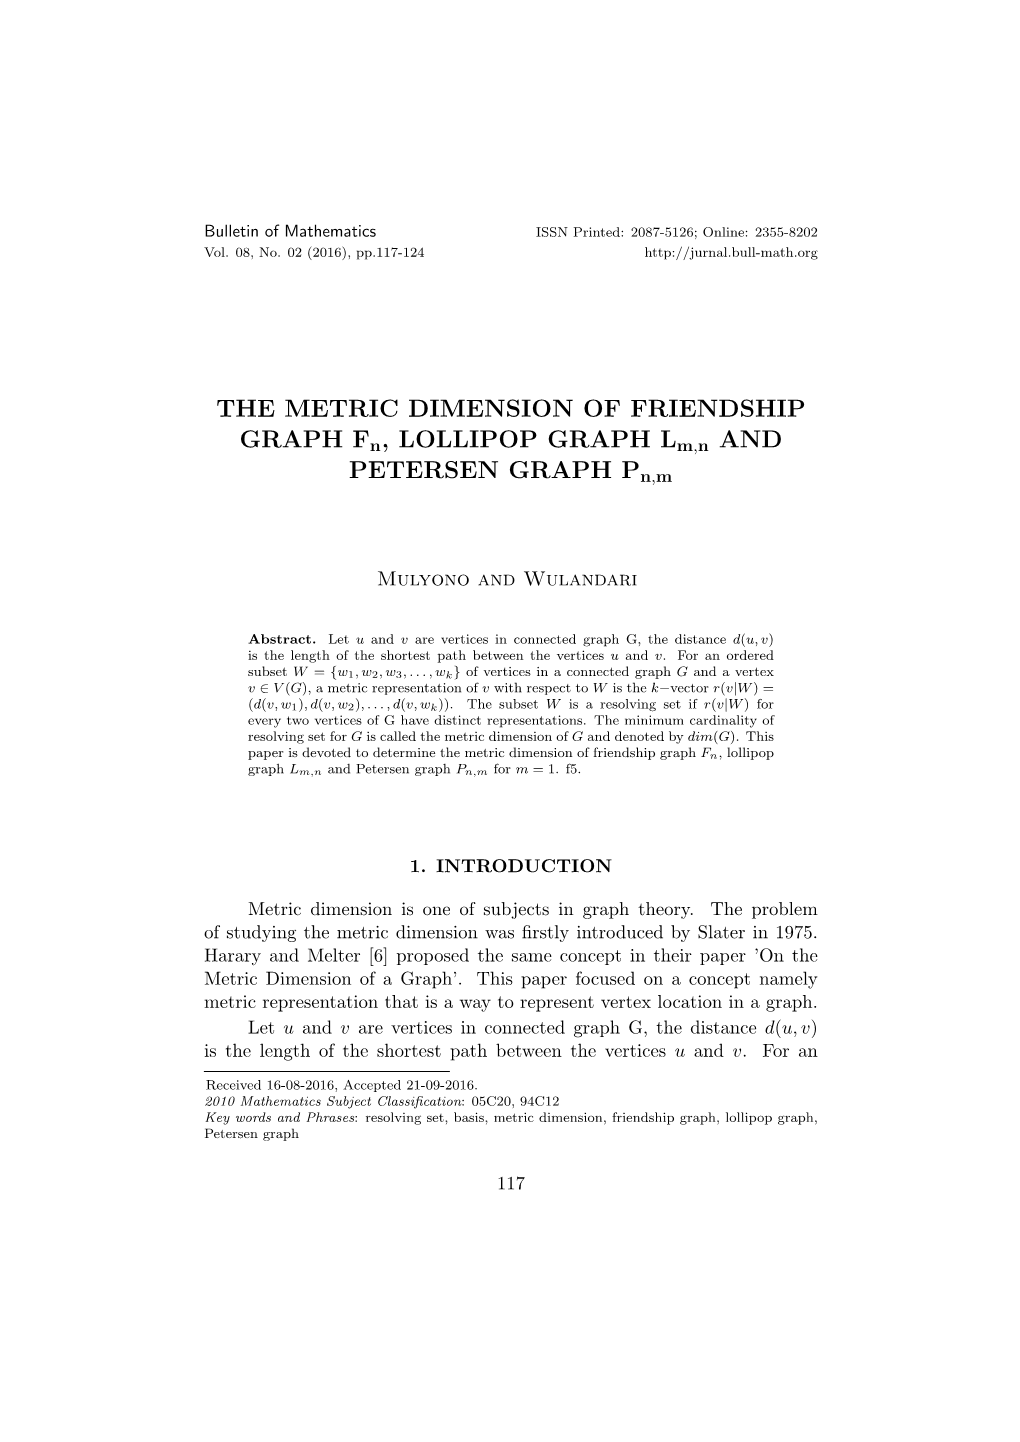 THE METRIC DIMENSION of FRIENDSHIP GRAPH Fn, LOLLIPOP GRAPH Lm,N and PETERSEN GRAPH Pn,M